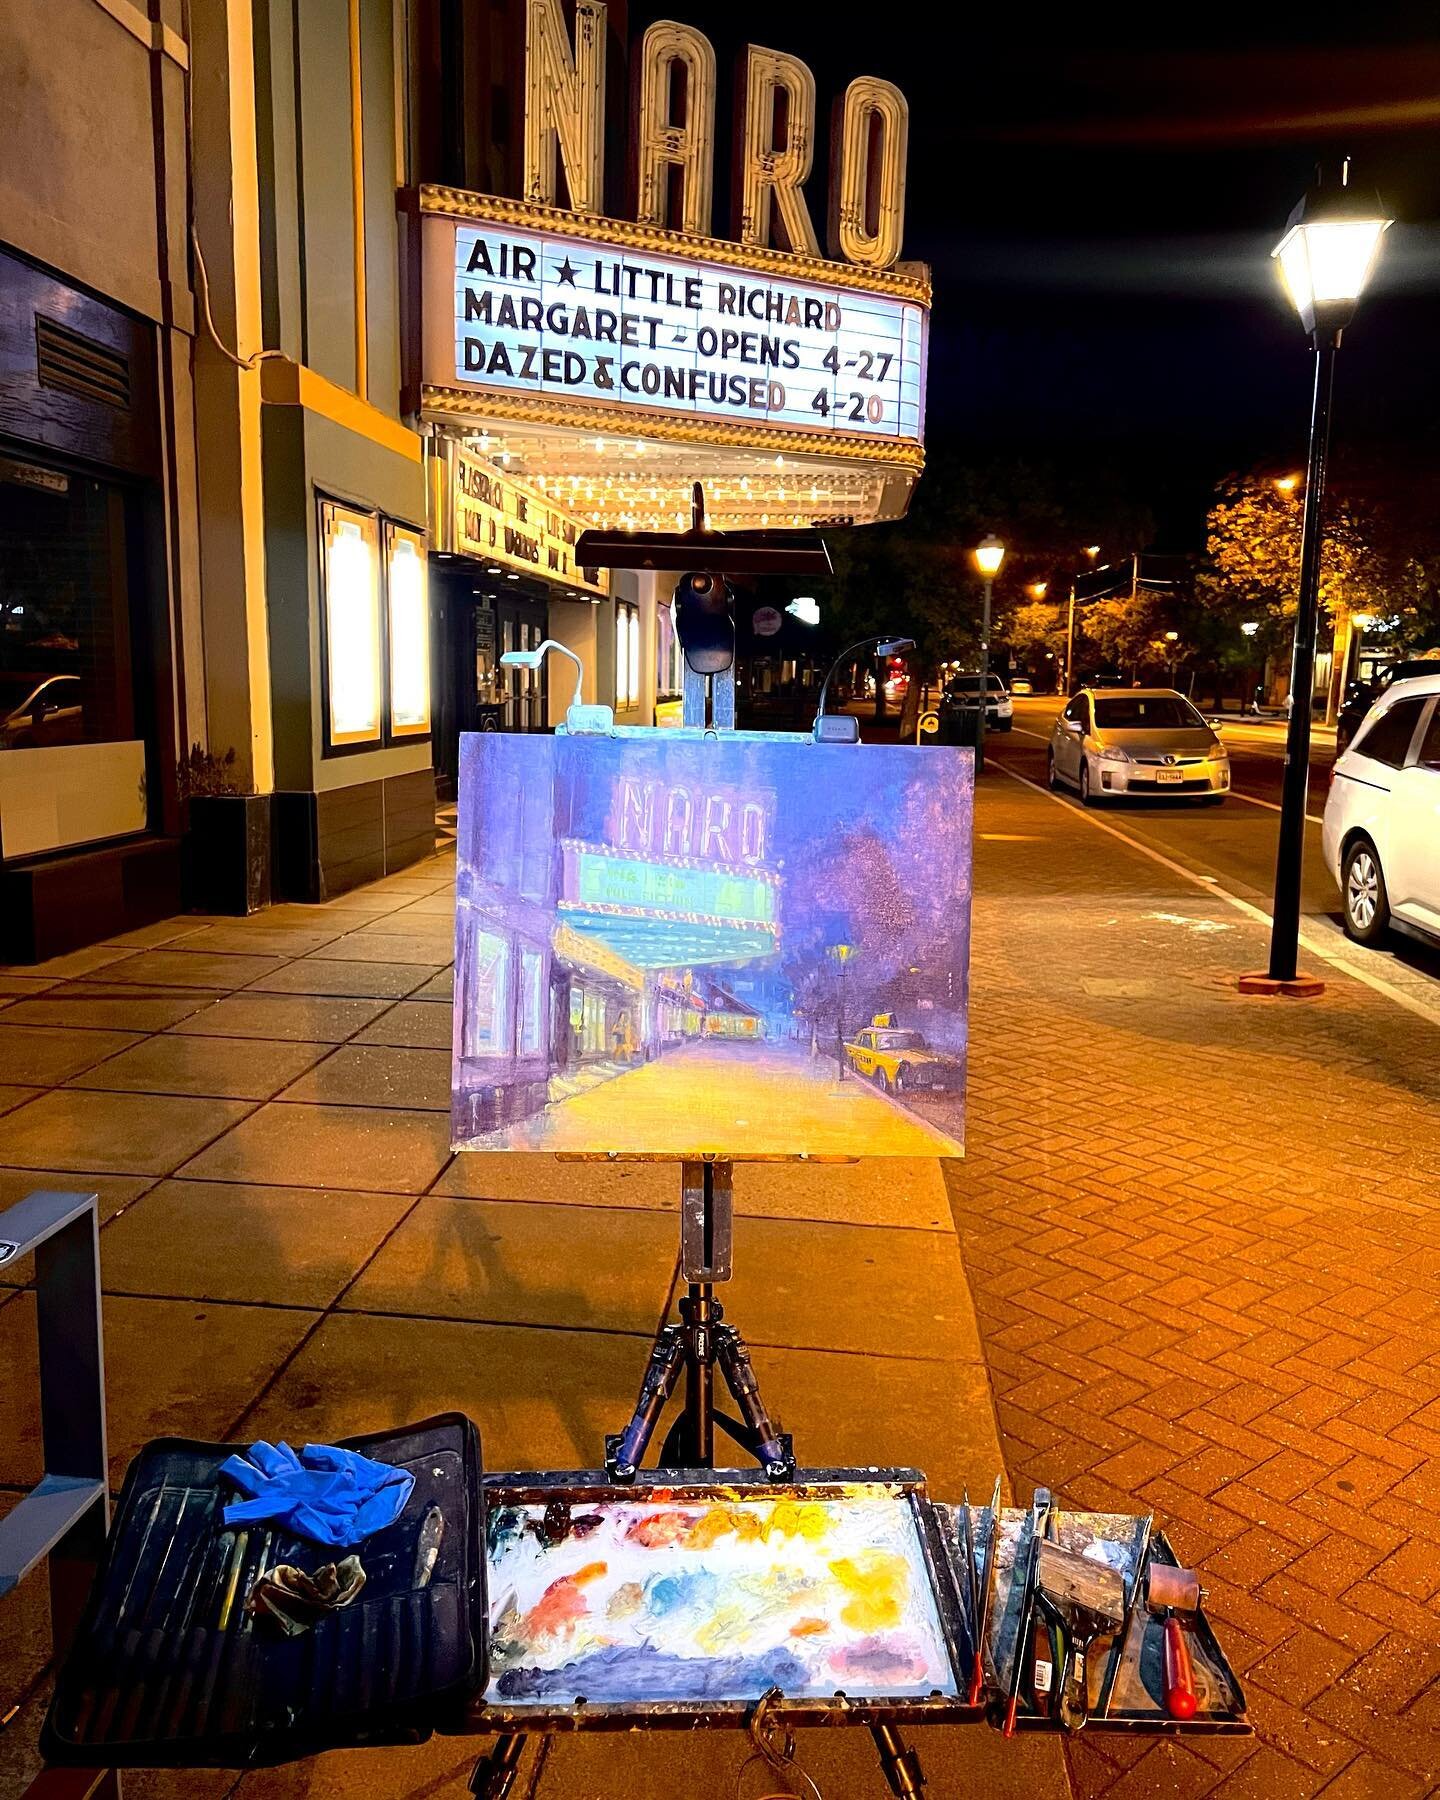 I was signing this just as lights cut off at 10 last night! Fun session as always in Norfolk! This weekend is the show for the Coastal Virginia Plein Air! #fineart #art #painting #oil #instaart #instaartist #pleinair #pleinairpainting #outdoorpaintin